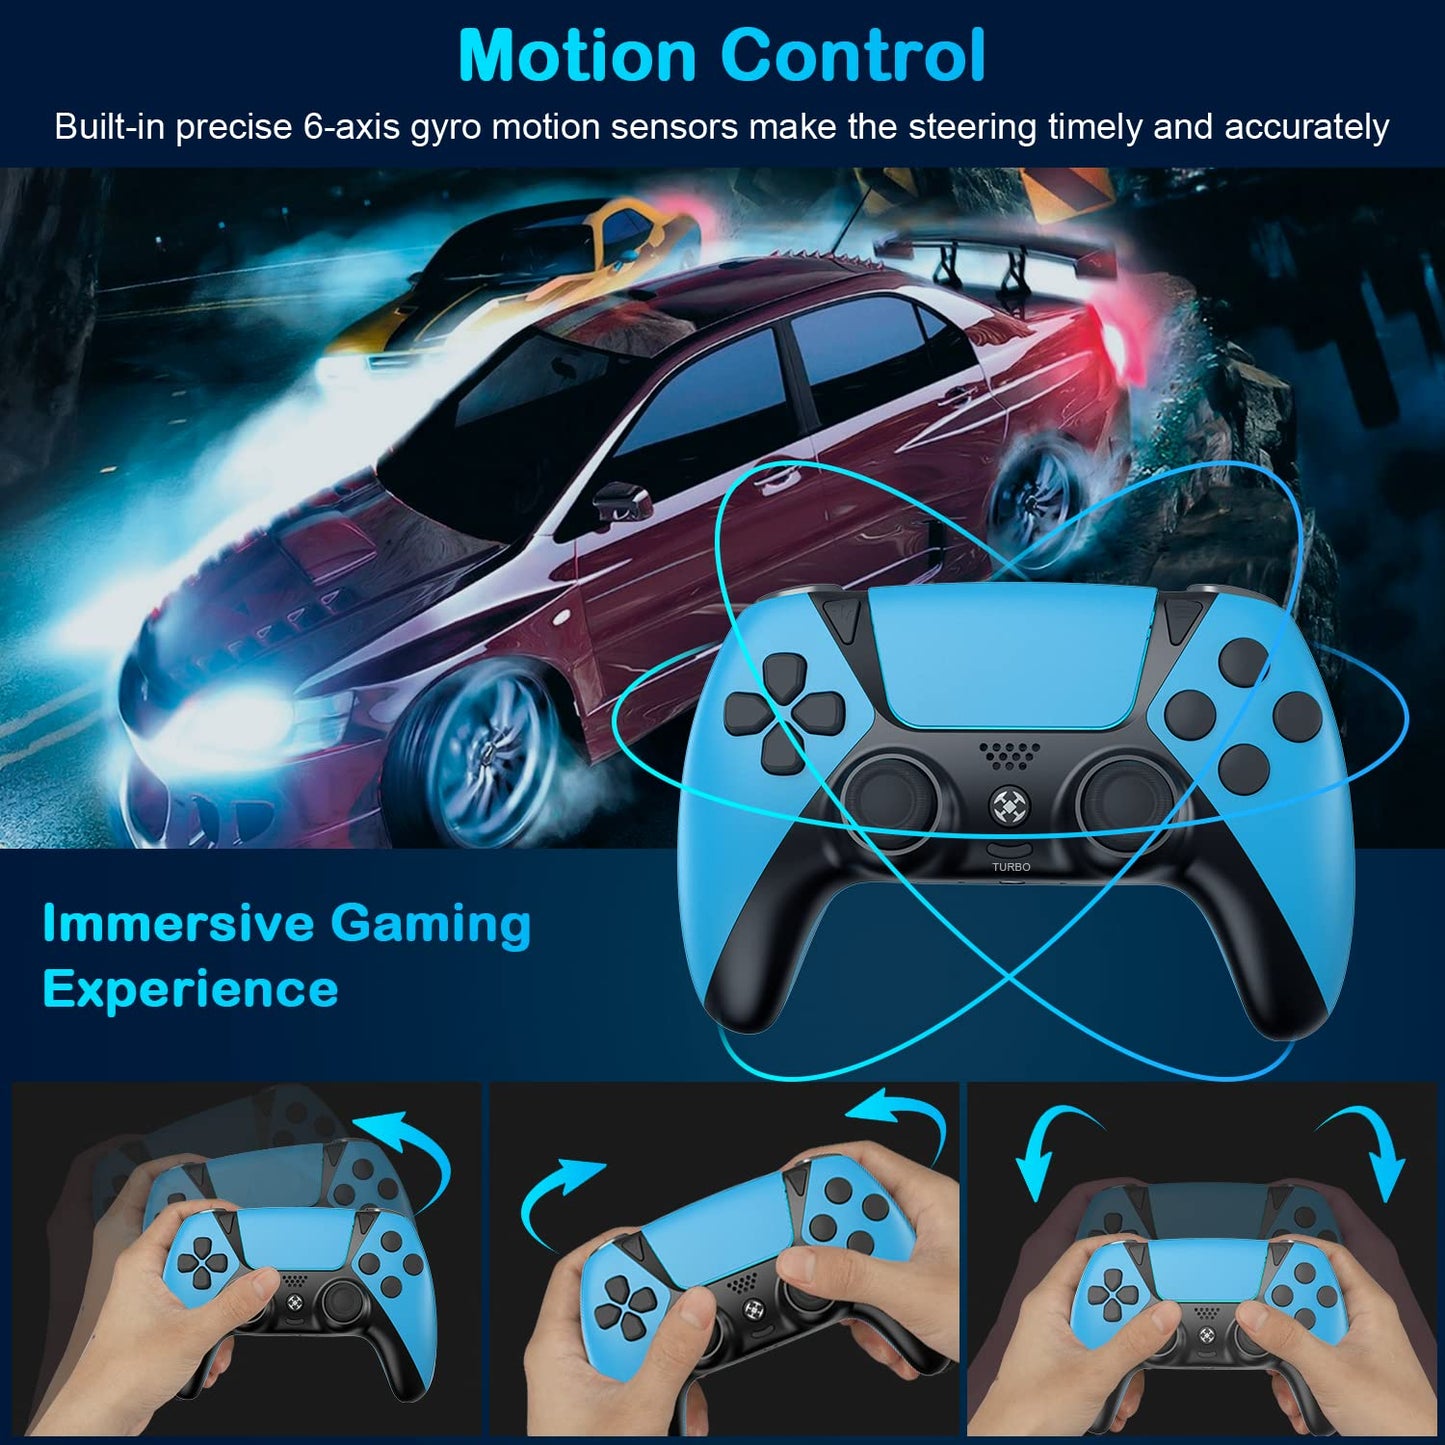 UGAME Ymir Gamepad for PS4 Controller, Elite Wireless Remote for Playstation 4 Controller Compatible with PS4/Slim/Pro/Steam/PC , with Upgraded Programming Function/Turbo/Motion Sensor/Dual Vibration( Blue)